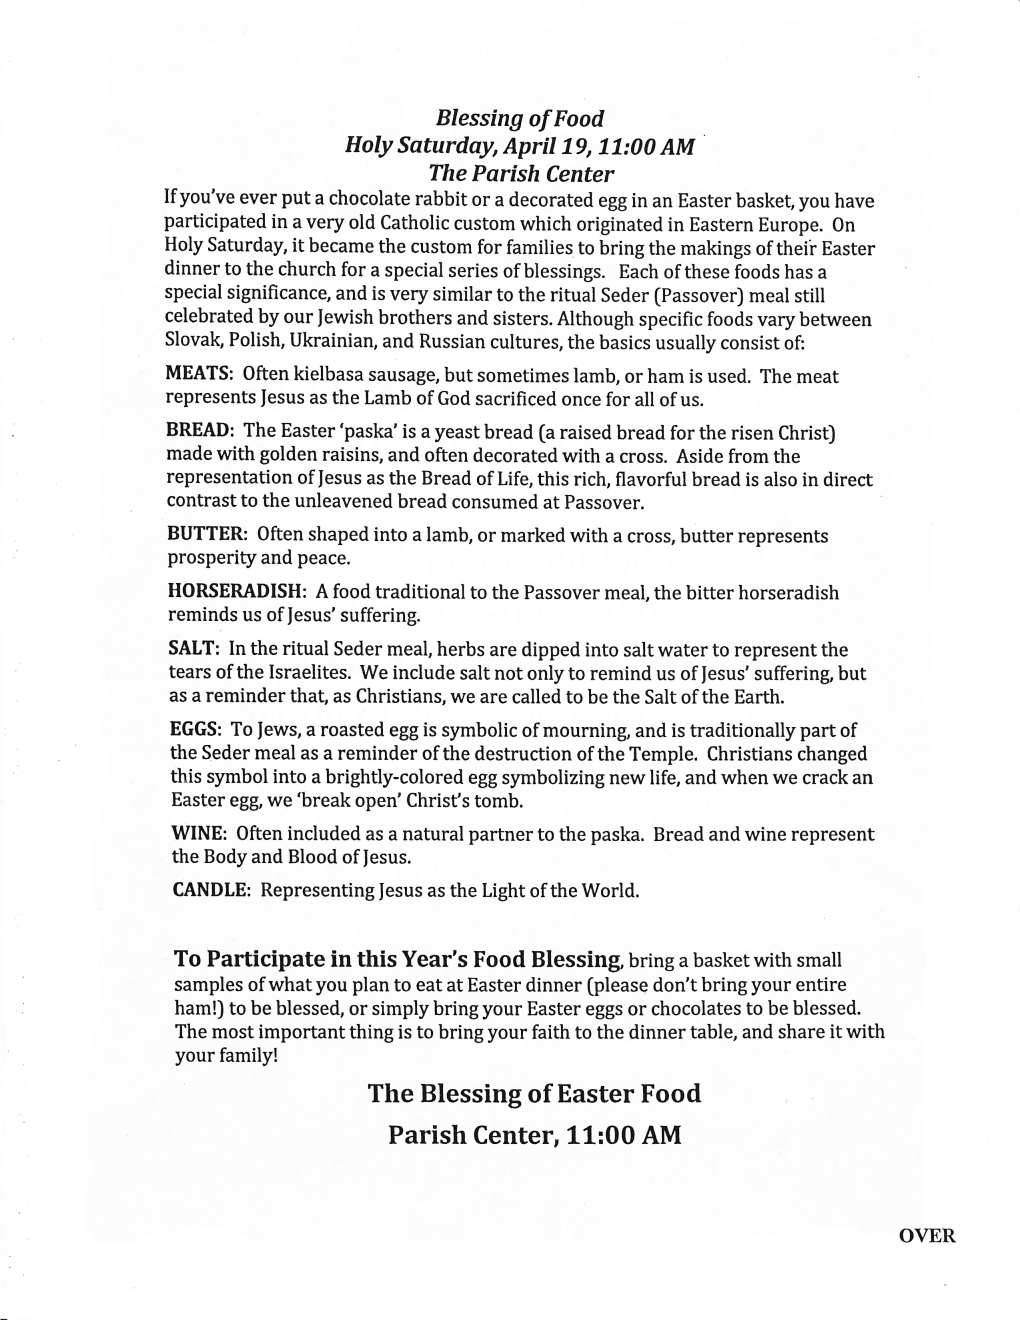 The Blessing of Easter Food Parish Center, 11:00 AM